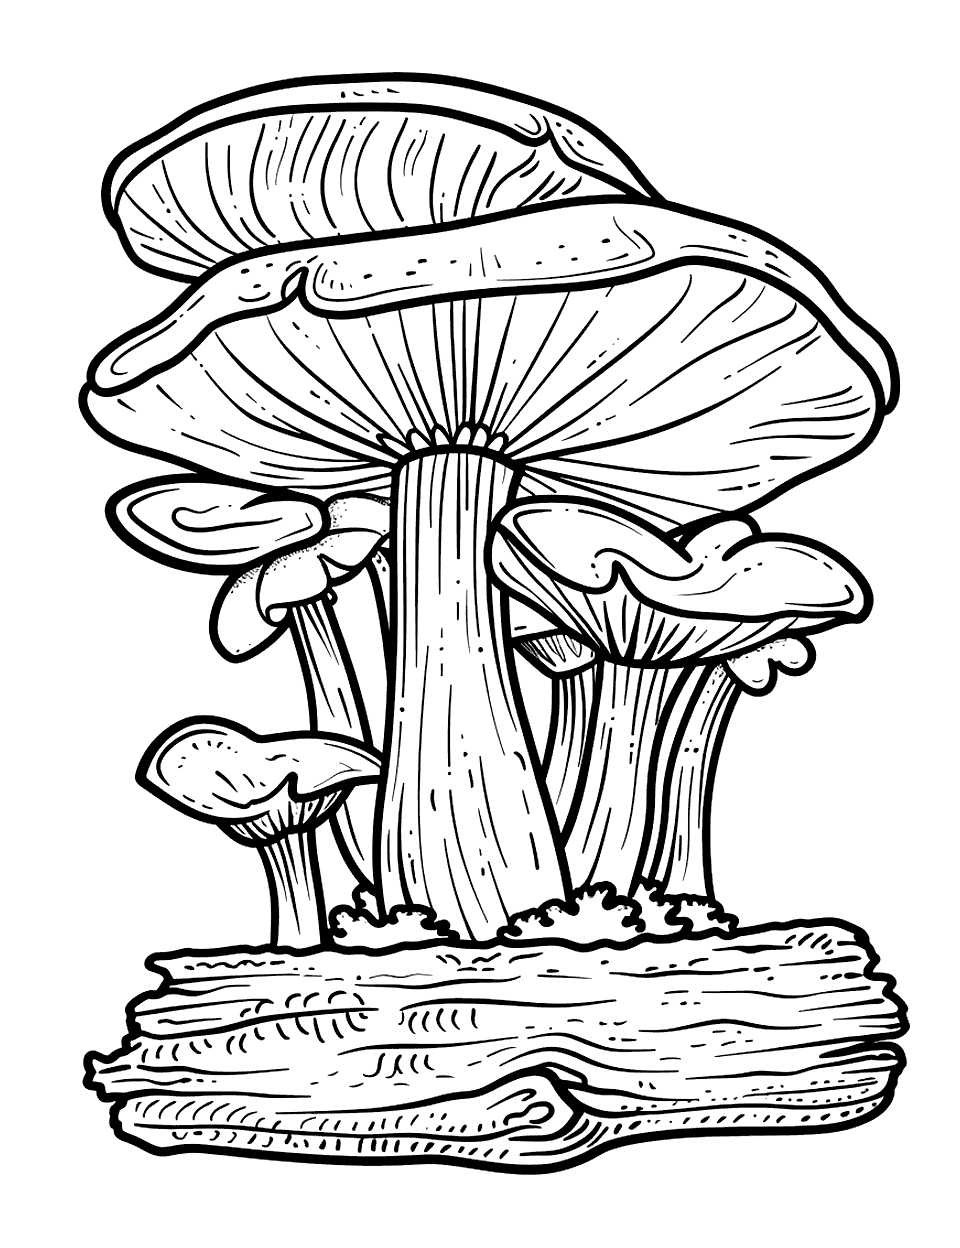 Oyster Mushroom Cluster Coloring Page - A realistic depiction of oyster mushrooms growing together on a log.